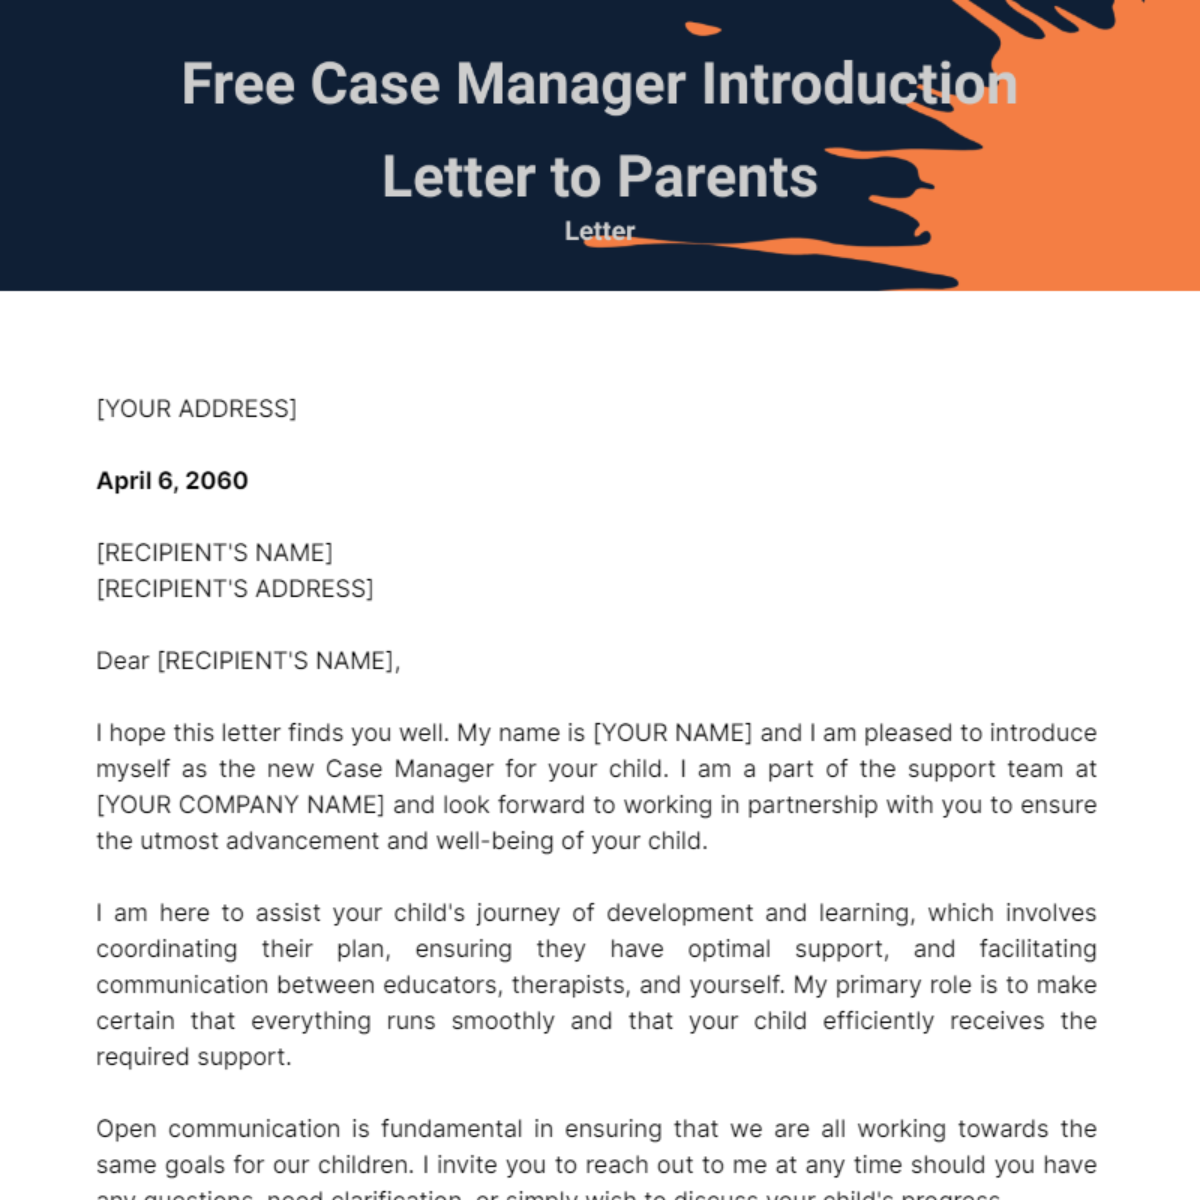 Case Manager Introduction Letter to Parents Template